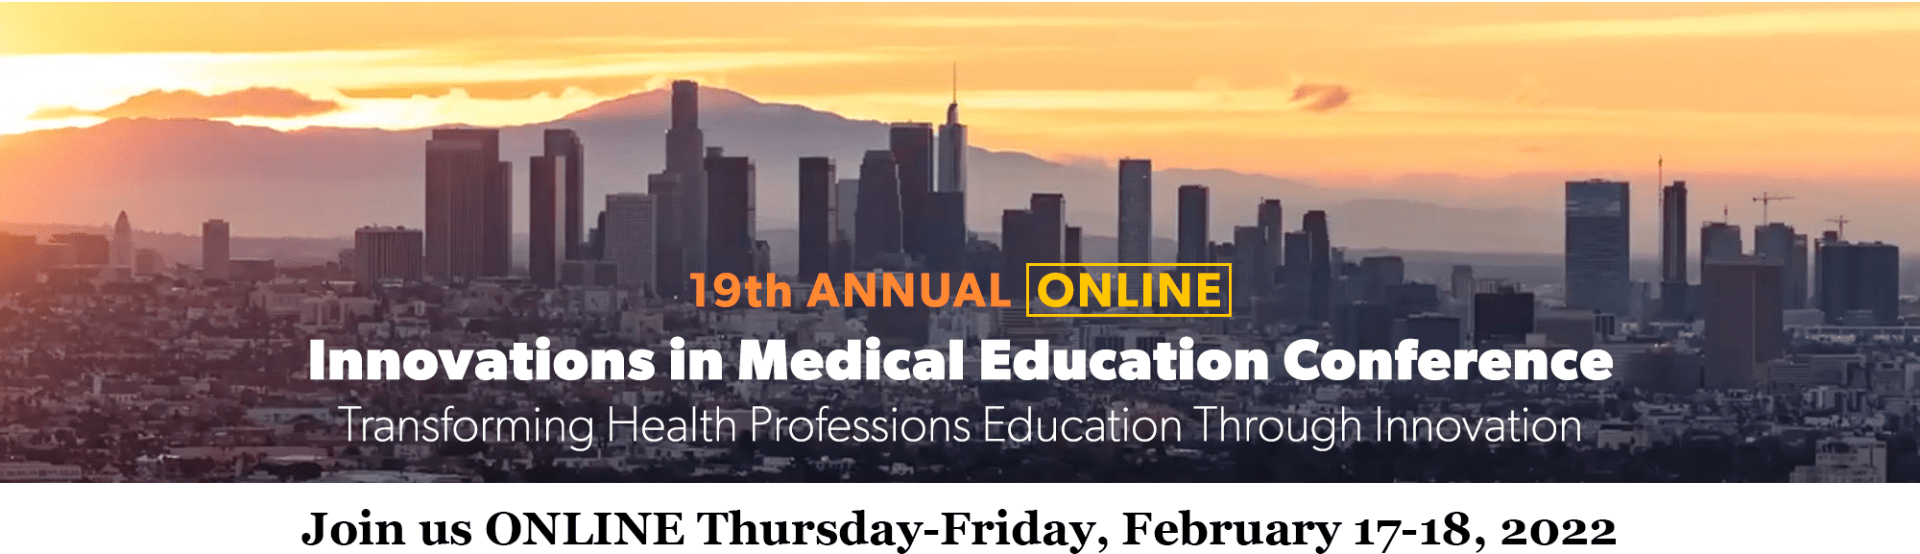 Innovations in Medical Education Online Conference 2022